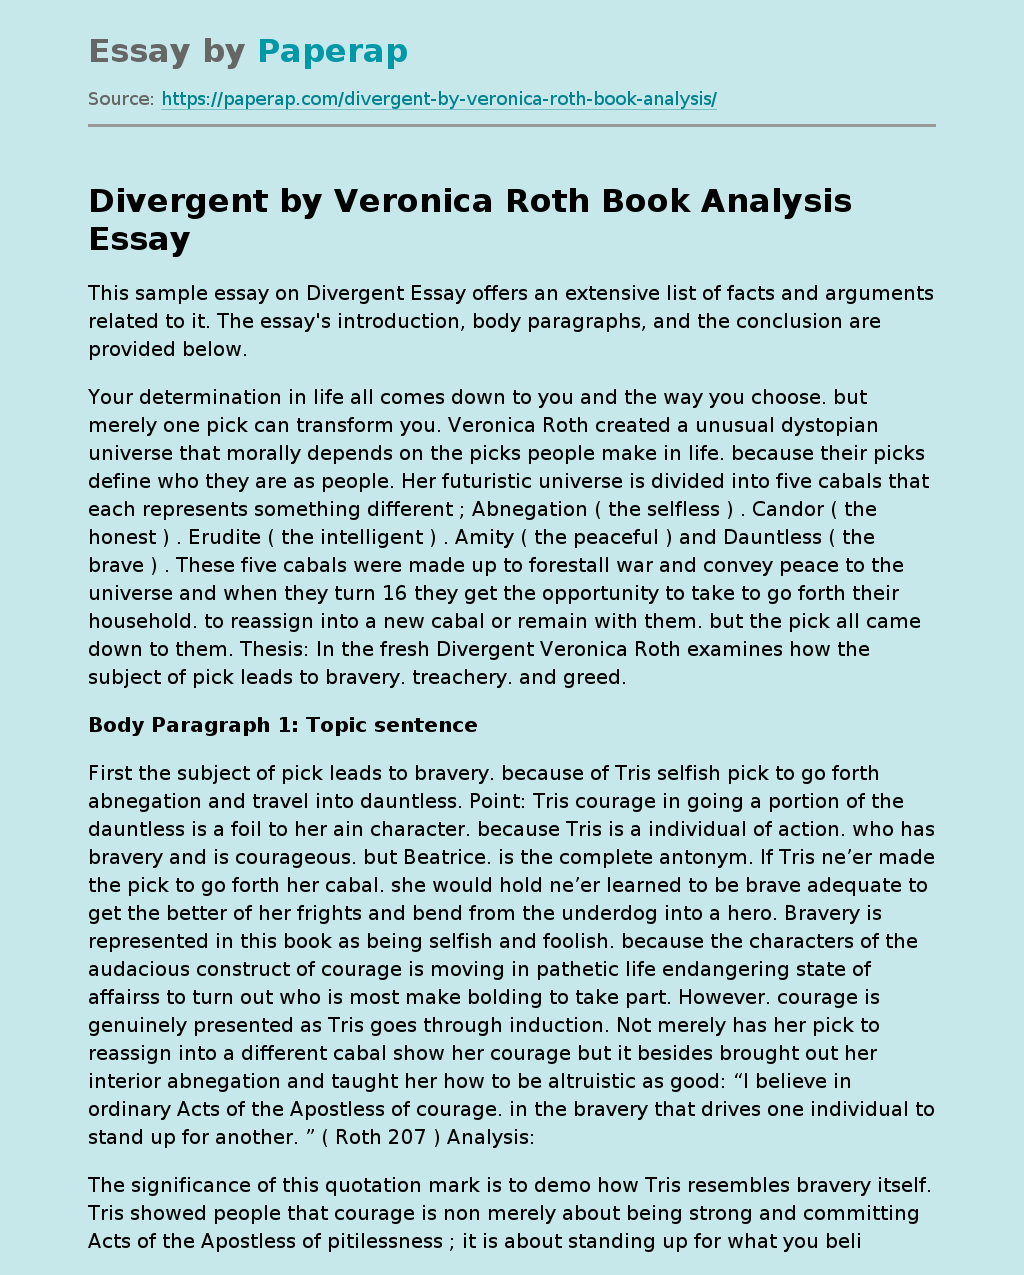 Divergent by Veronica Roth Book Analysis